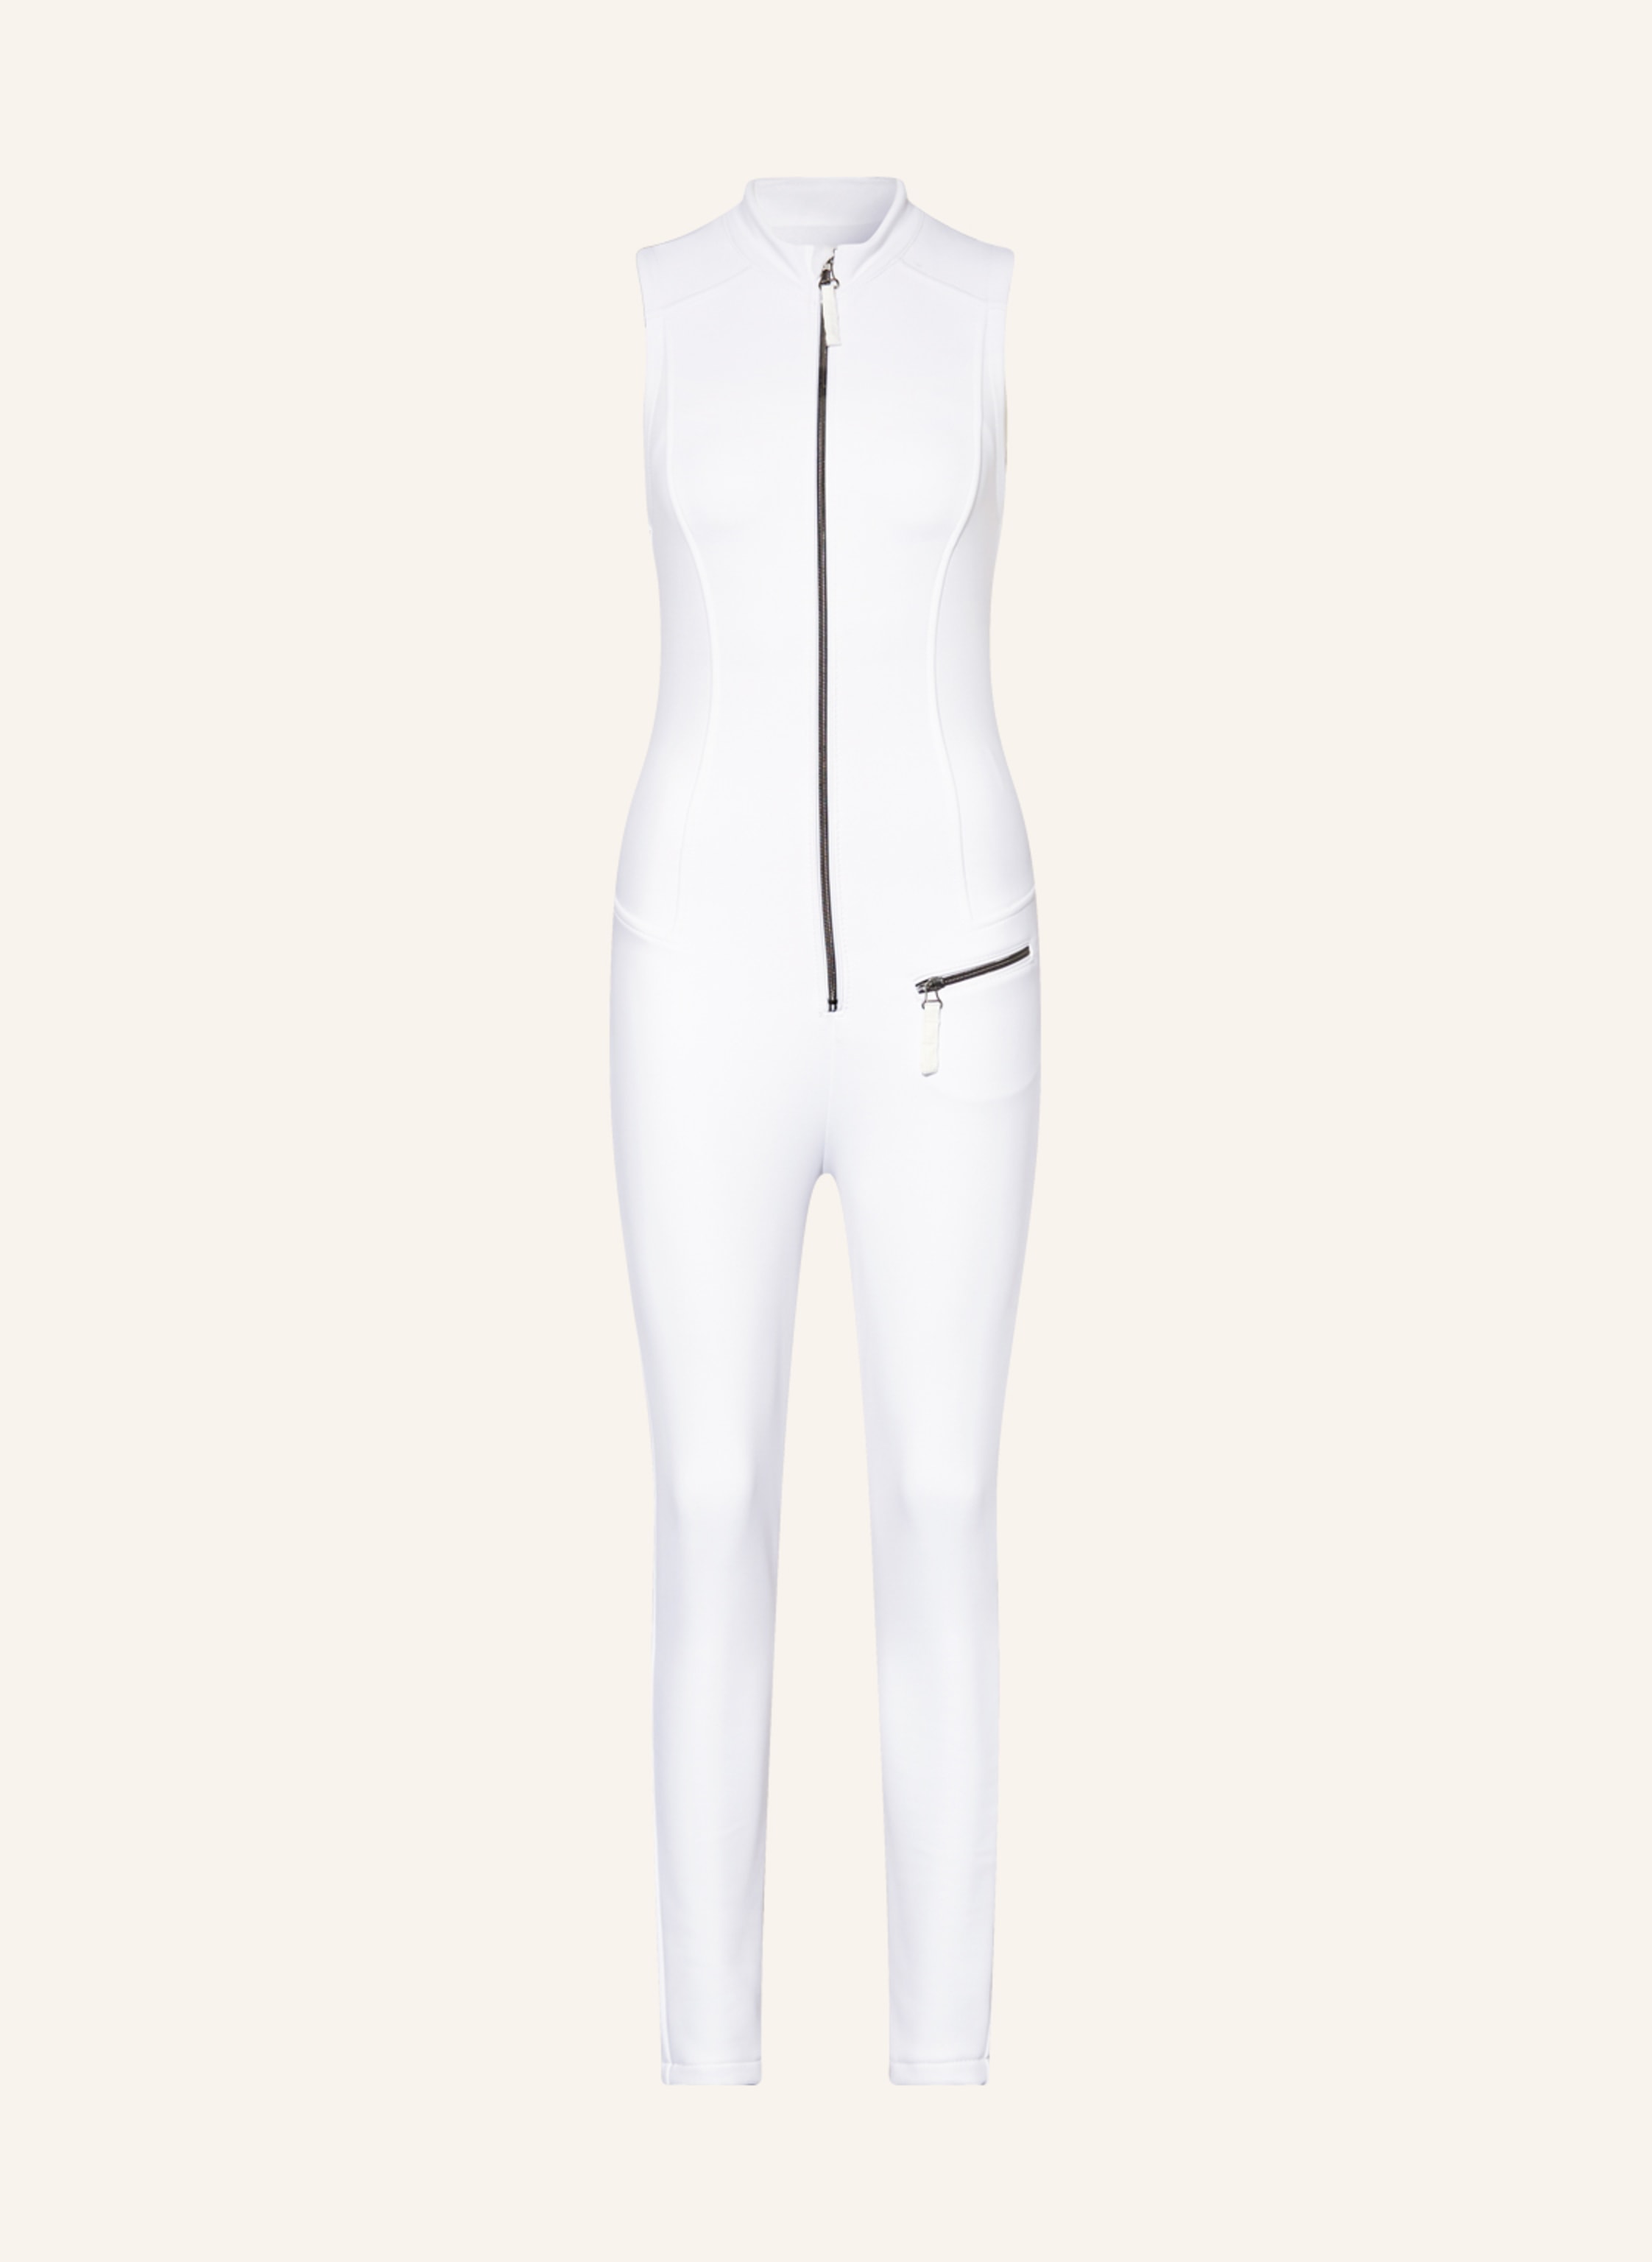 JET SET Softshell-Skioverall DOMINA in creme